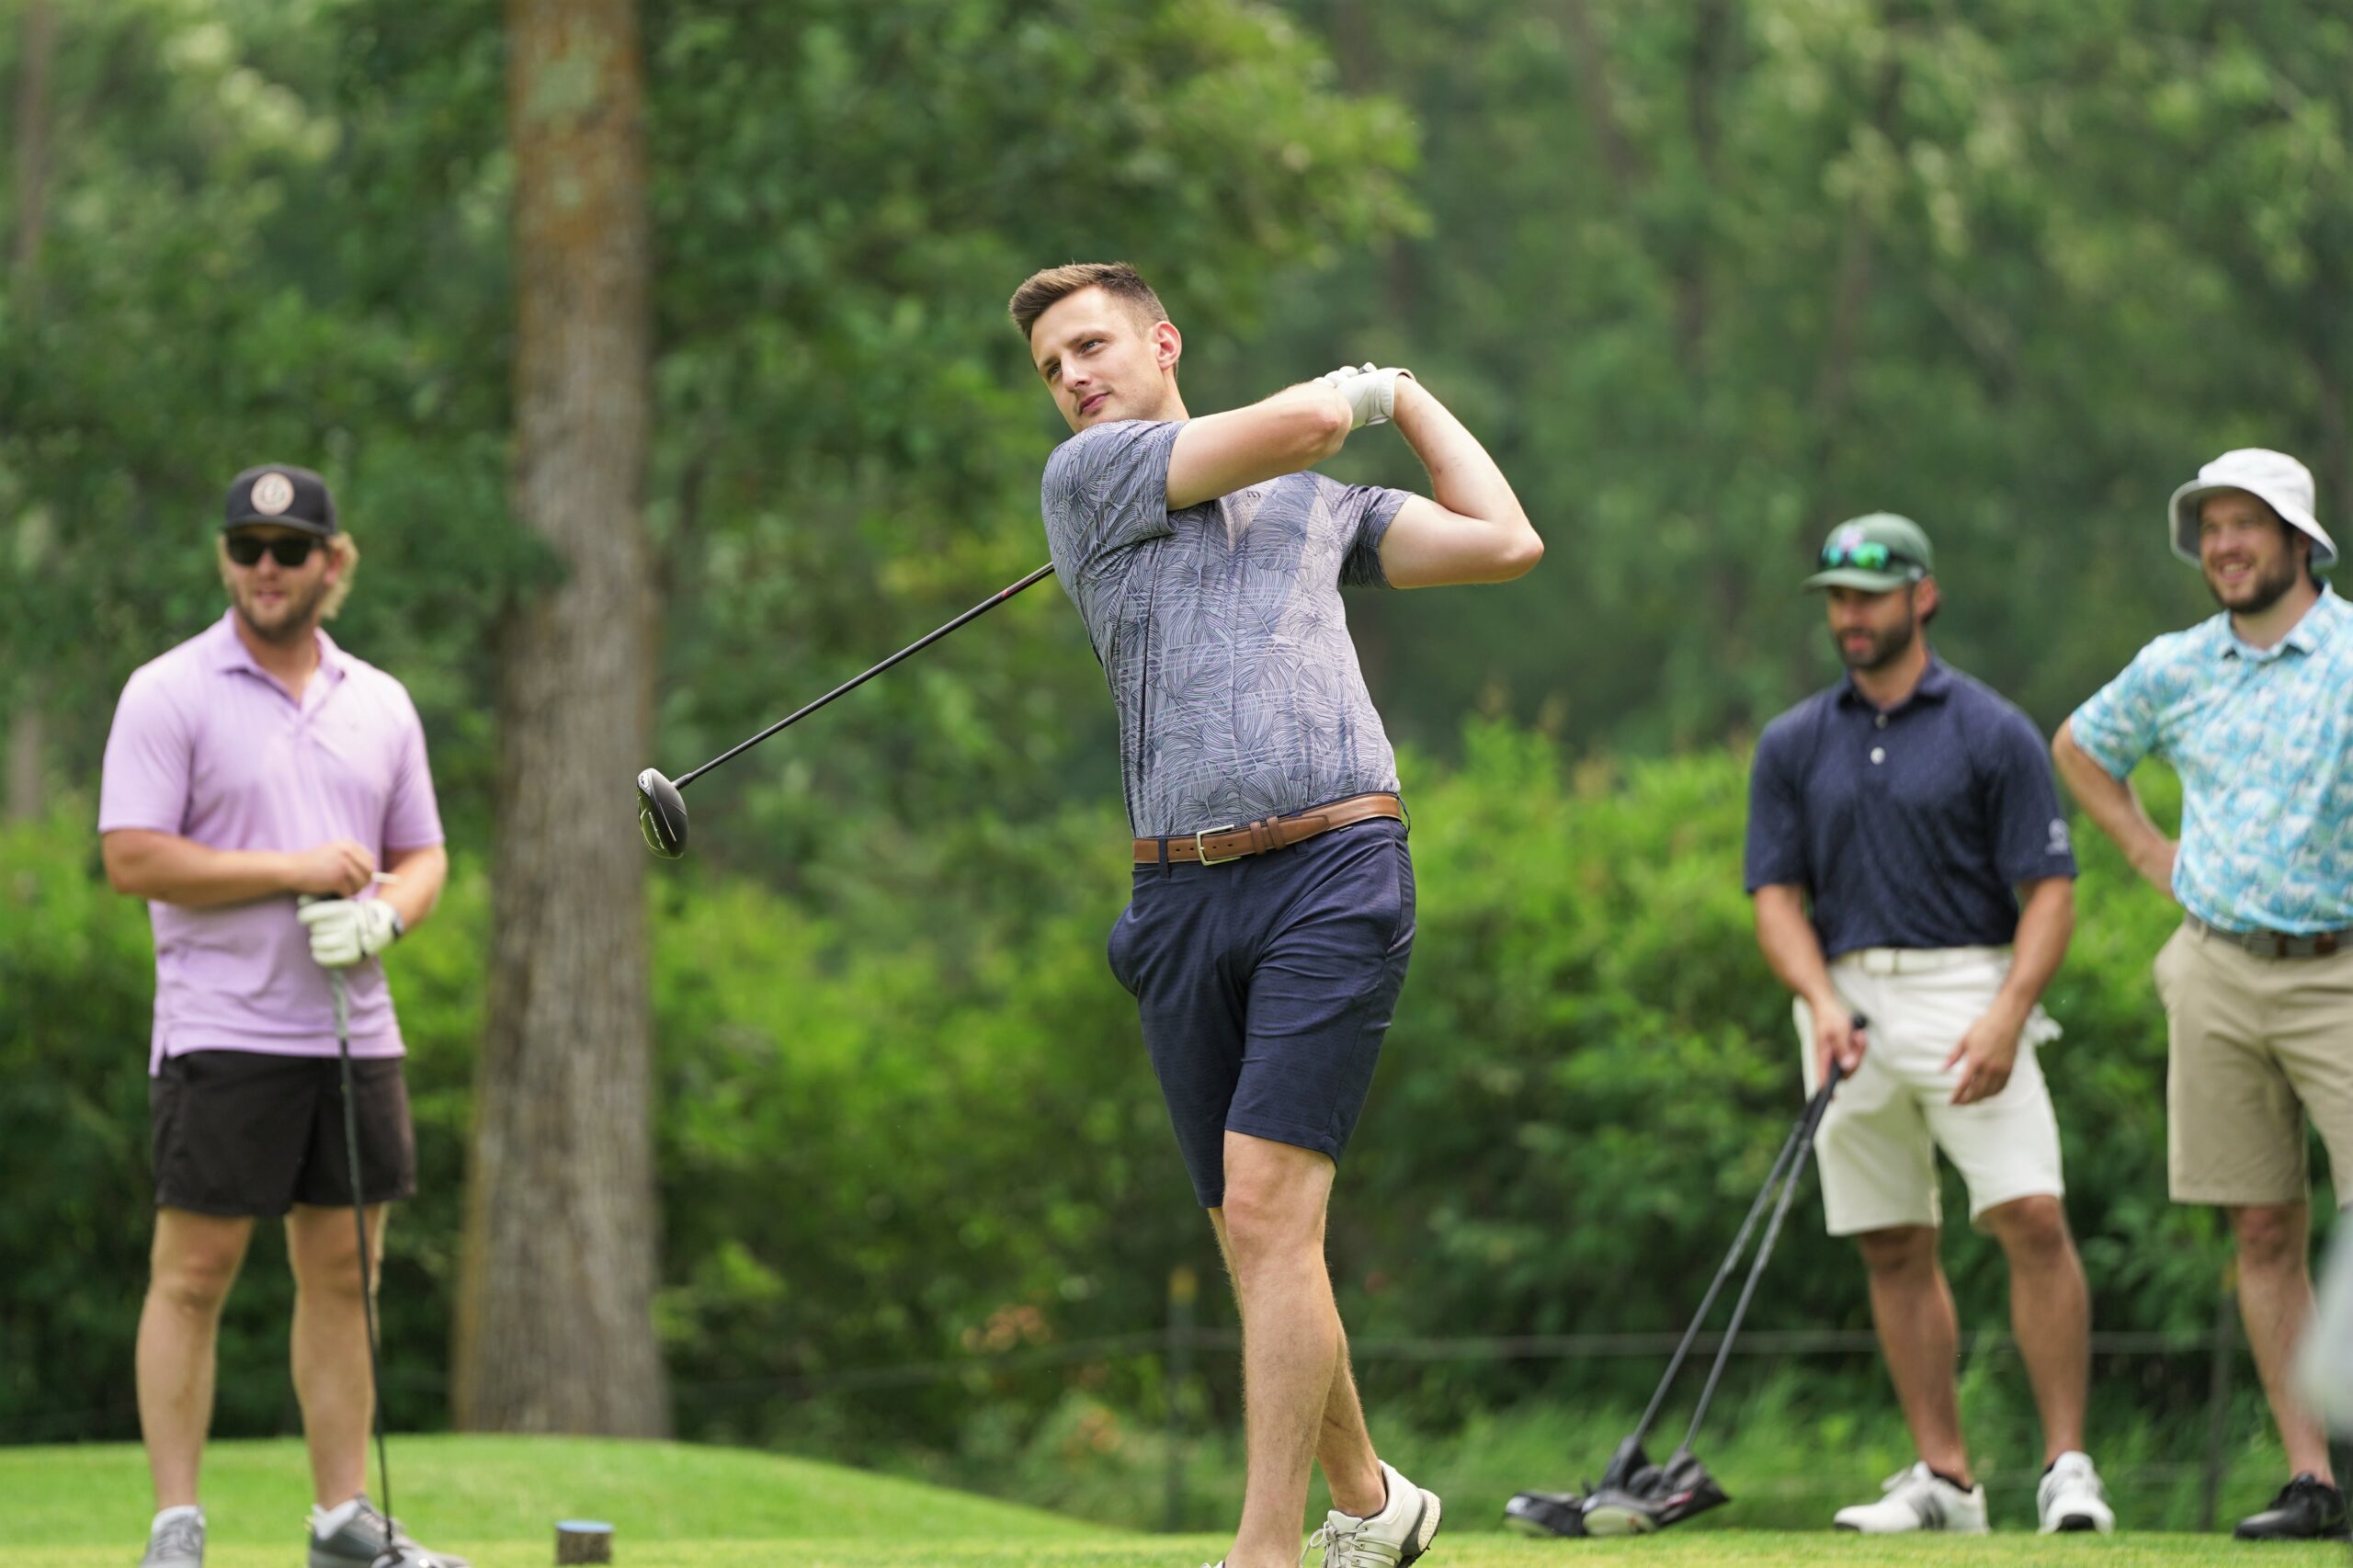 Jesse Wilkins tees off on hole No. 3 during the 26th annual Galen Nagle Memorial Golf Tournament on Friday, July 14, 2023, at the Bemidji Town and Country Club. (Micah Friez / Bemidji State)